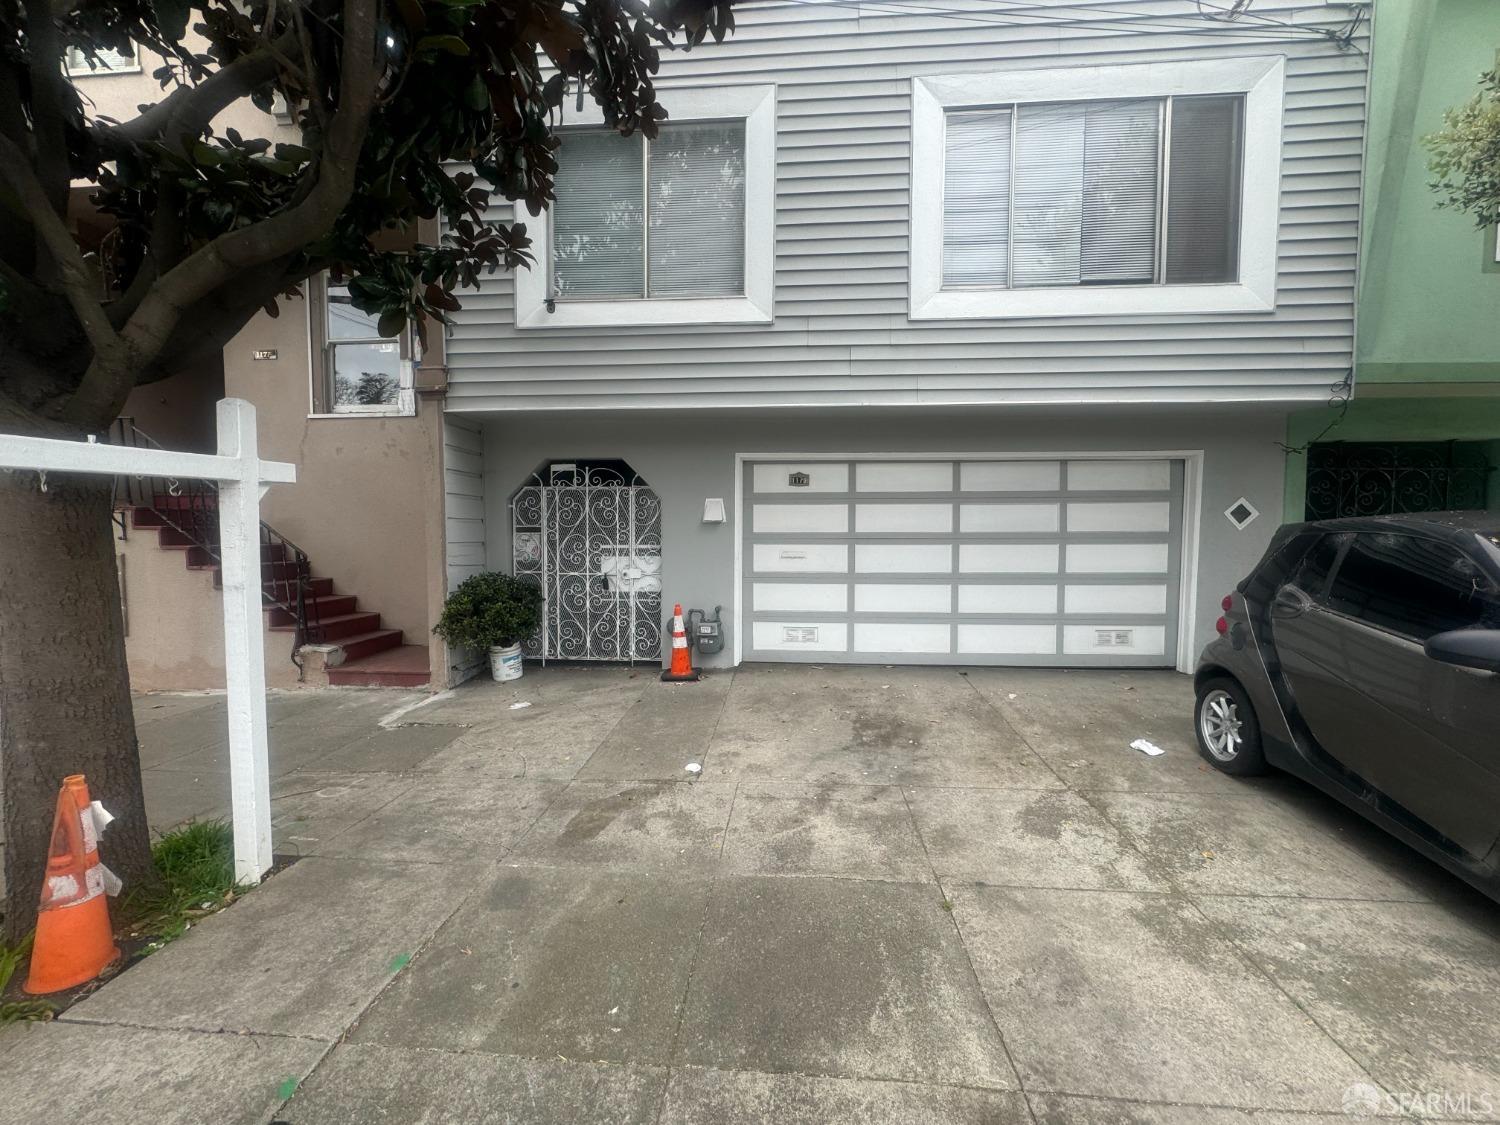 Photo of 1179 Palou Ave in San Francisco, CA